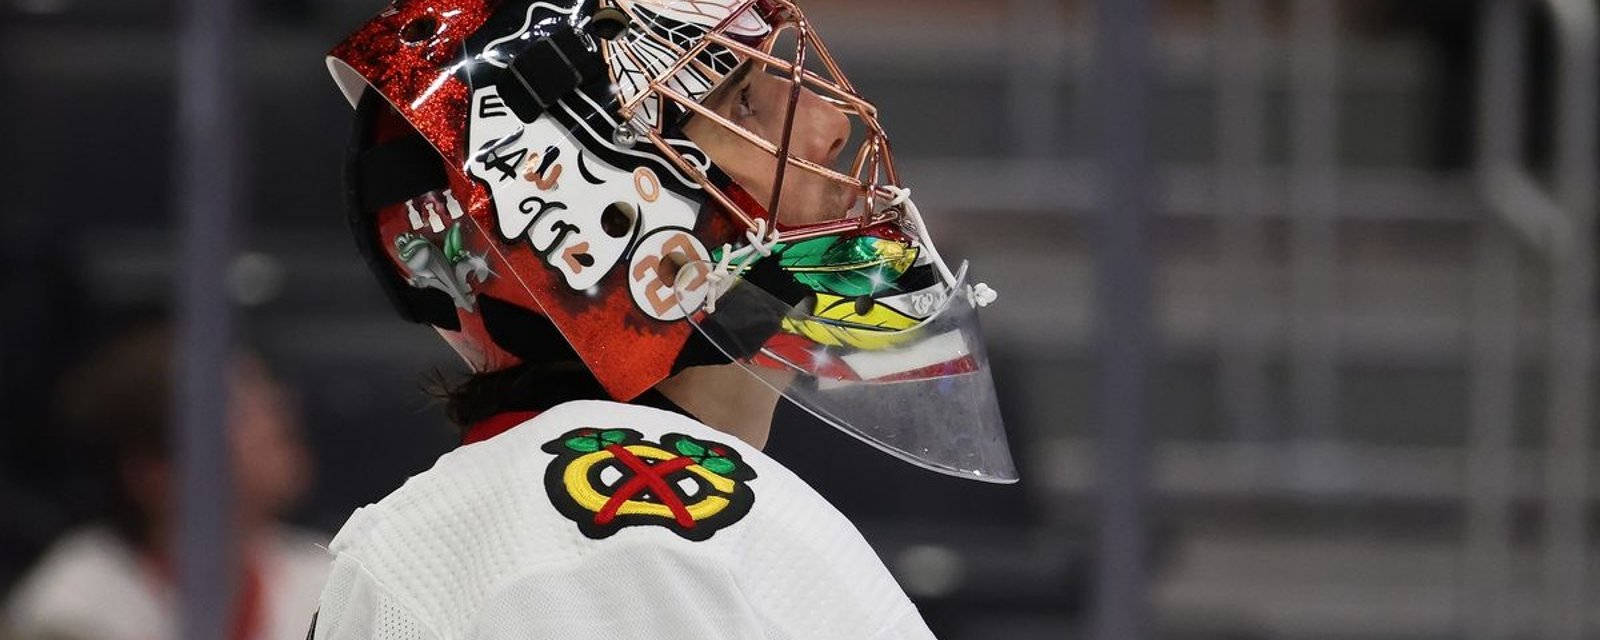 Marc-Andre Fleury embarrassed by the Blackhawks' start to the season.